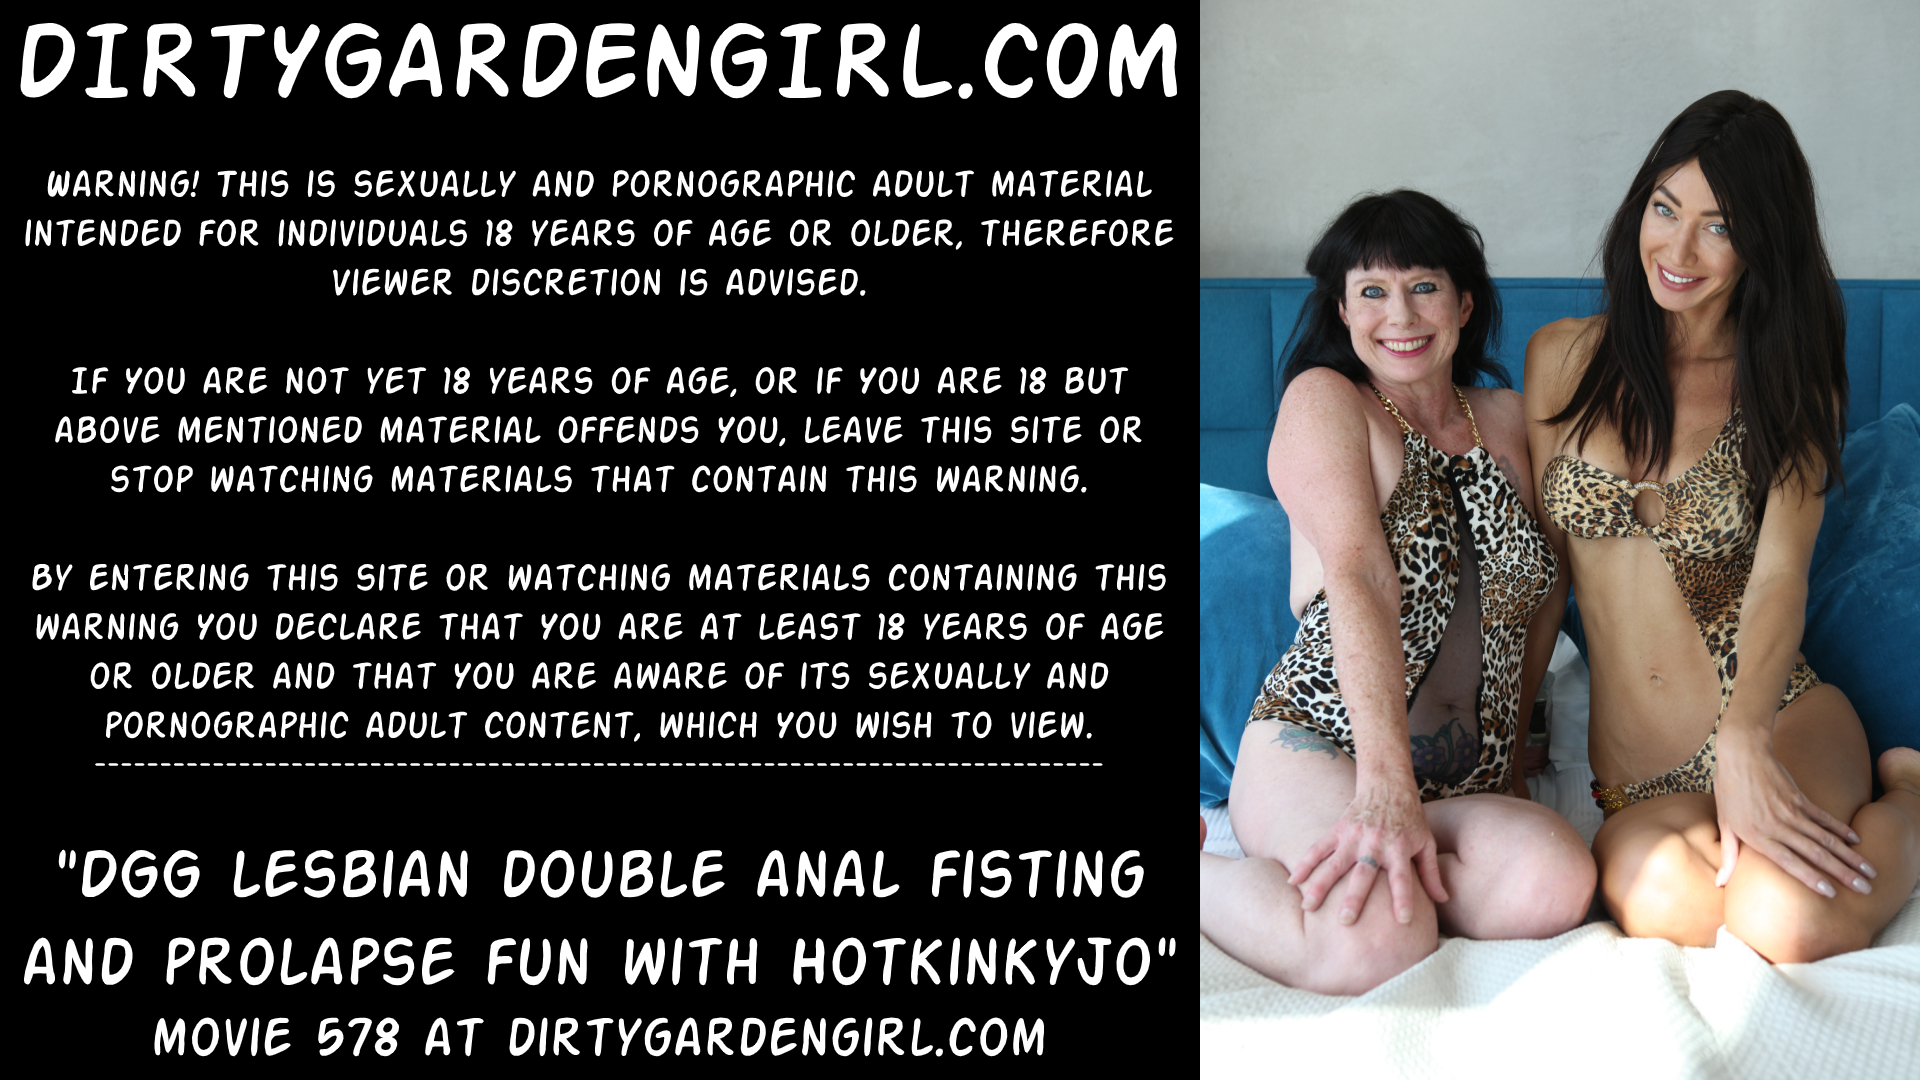 Dirtygardengirl lesbian double anal fisting and prolapse fun with Hotkinkyj